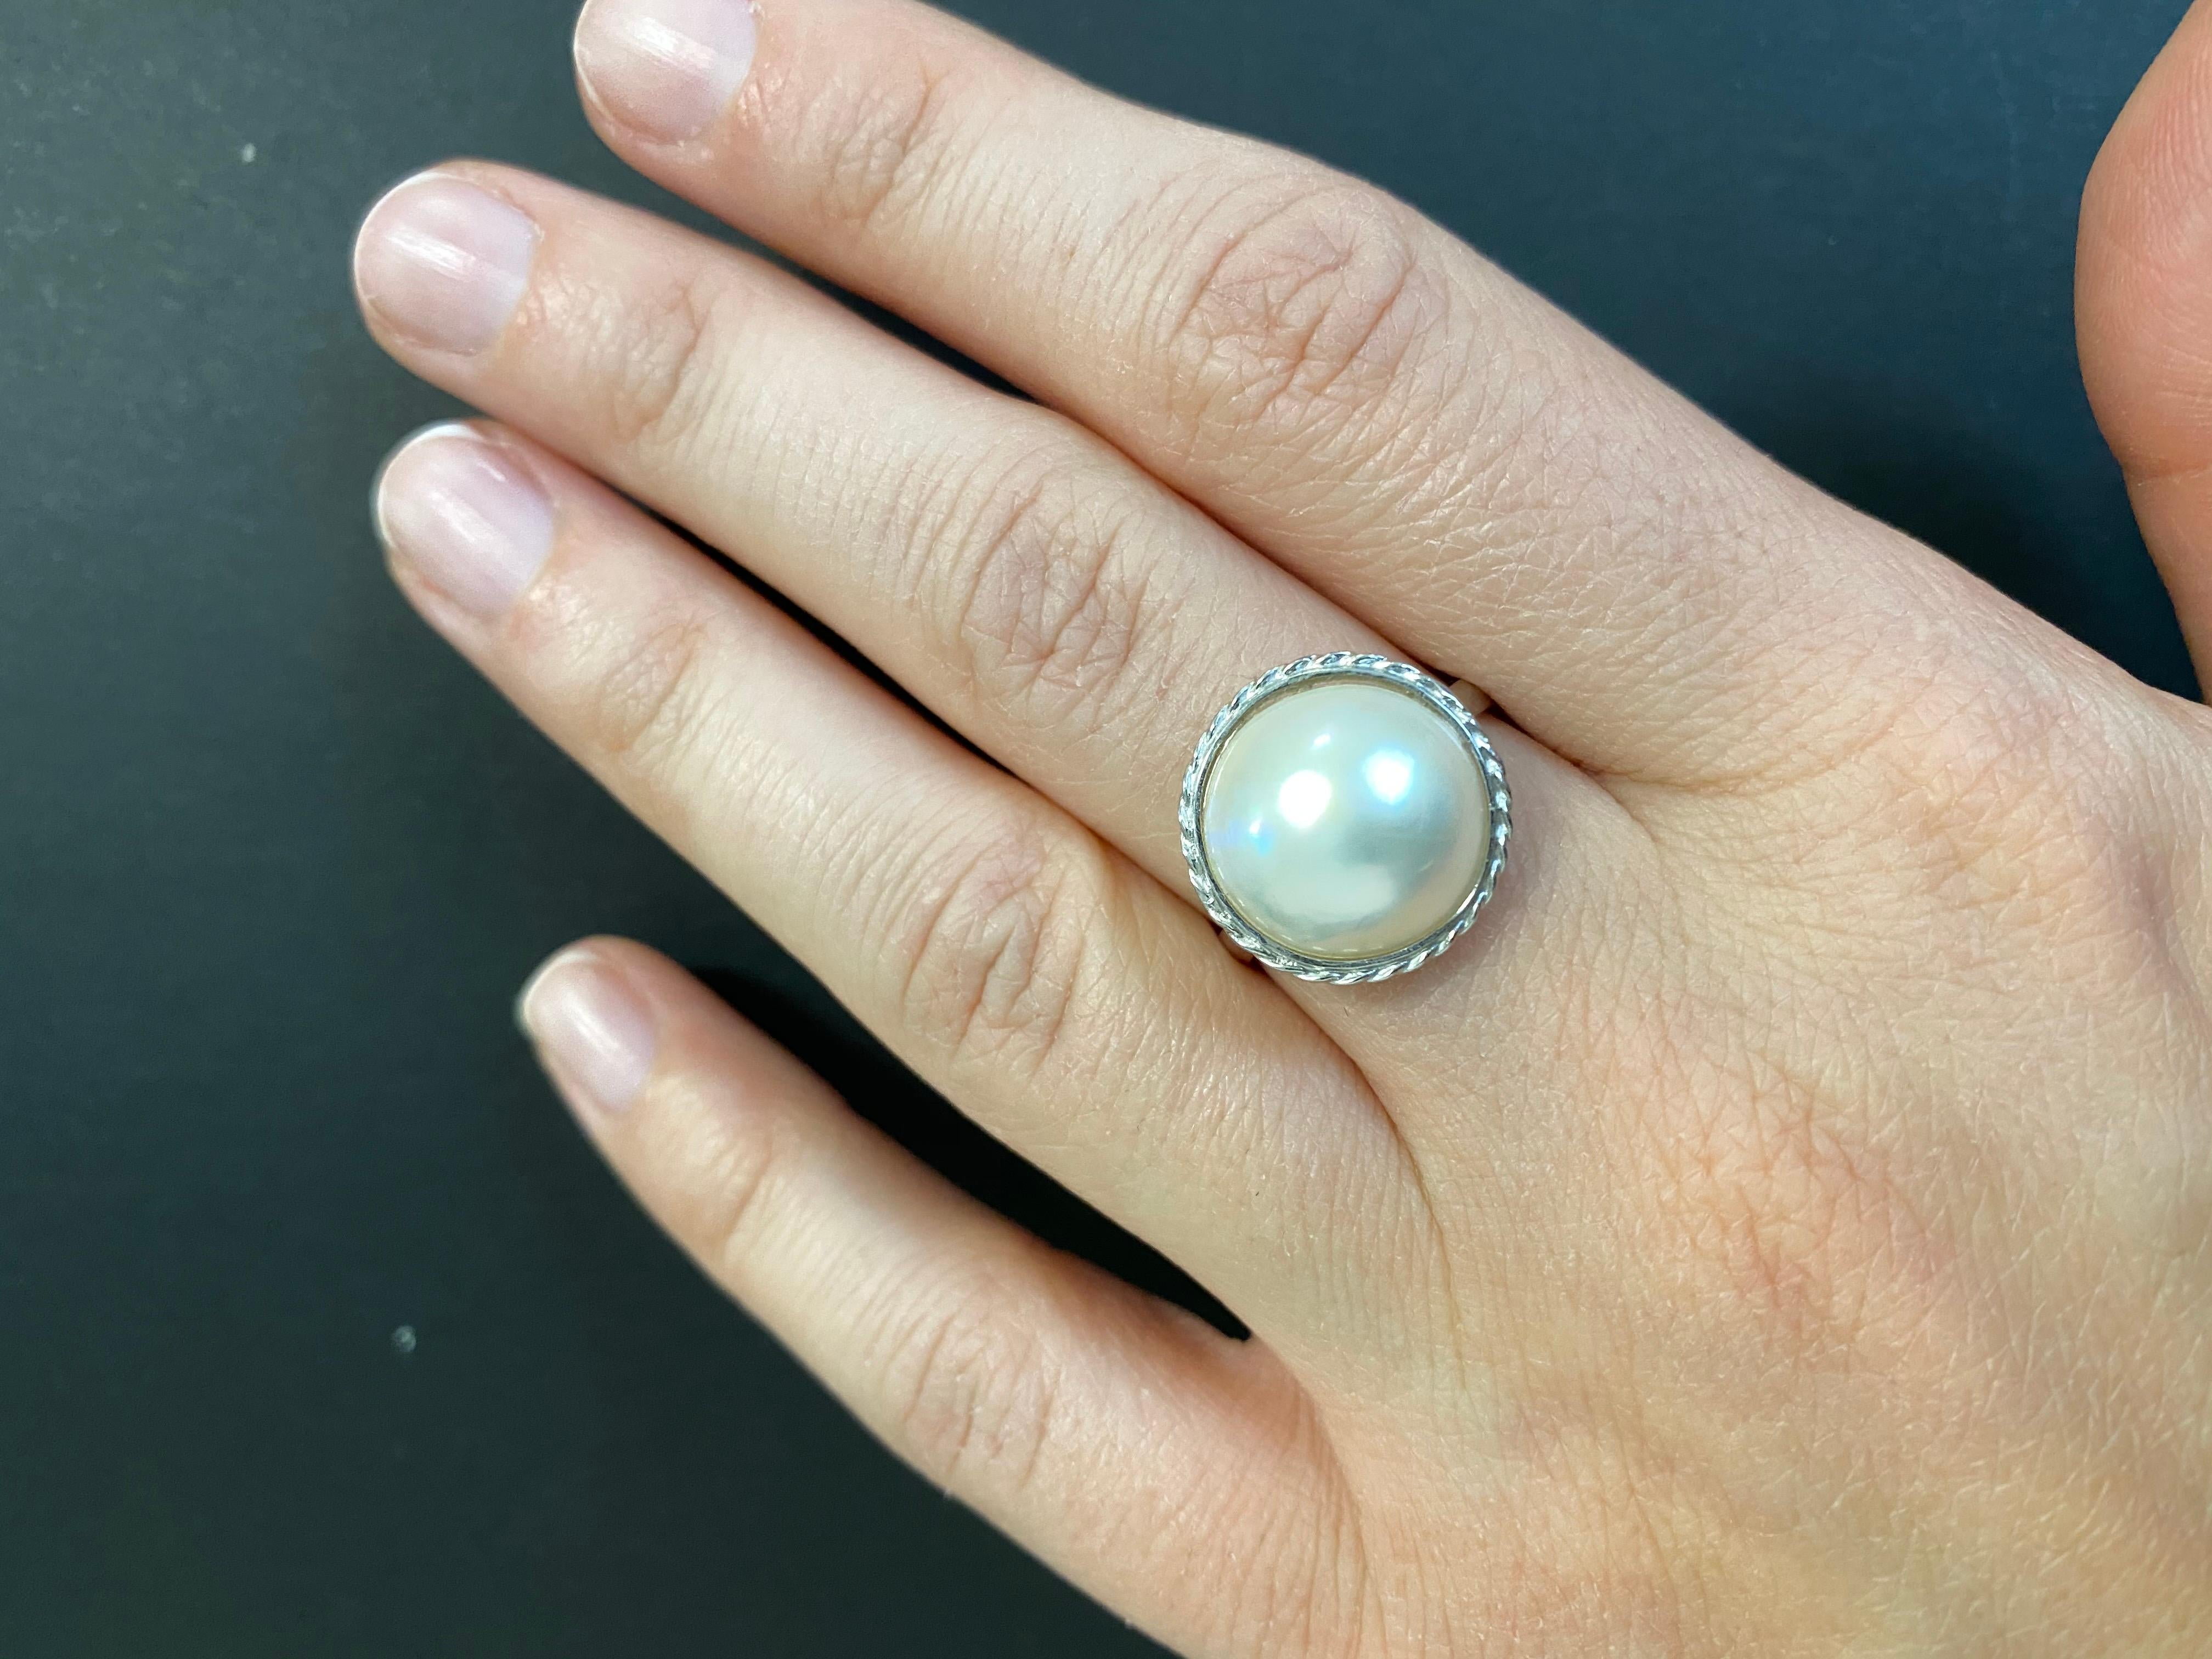 A staple for jewelry collectors everywhere, this 1.20 Carat Mother of Pearl Ring is set in a simple 14k White Gold casting. It is Perfect for anyone at any age and is truly a timeless orniment.

Material: 14k White Gold 
Center Stone Details: 1.20